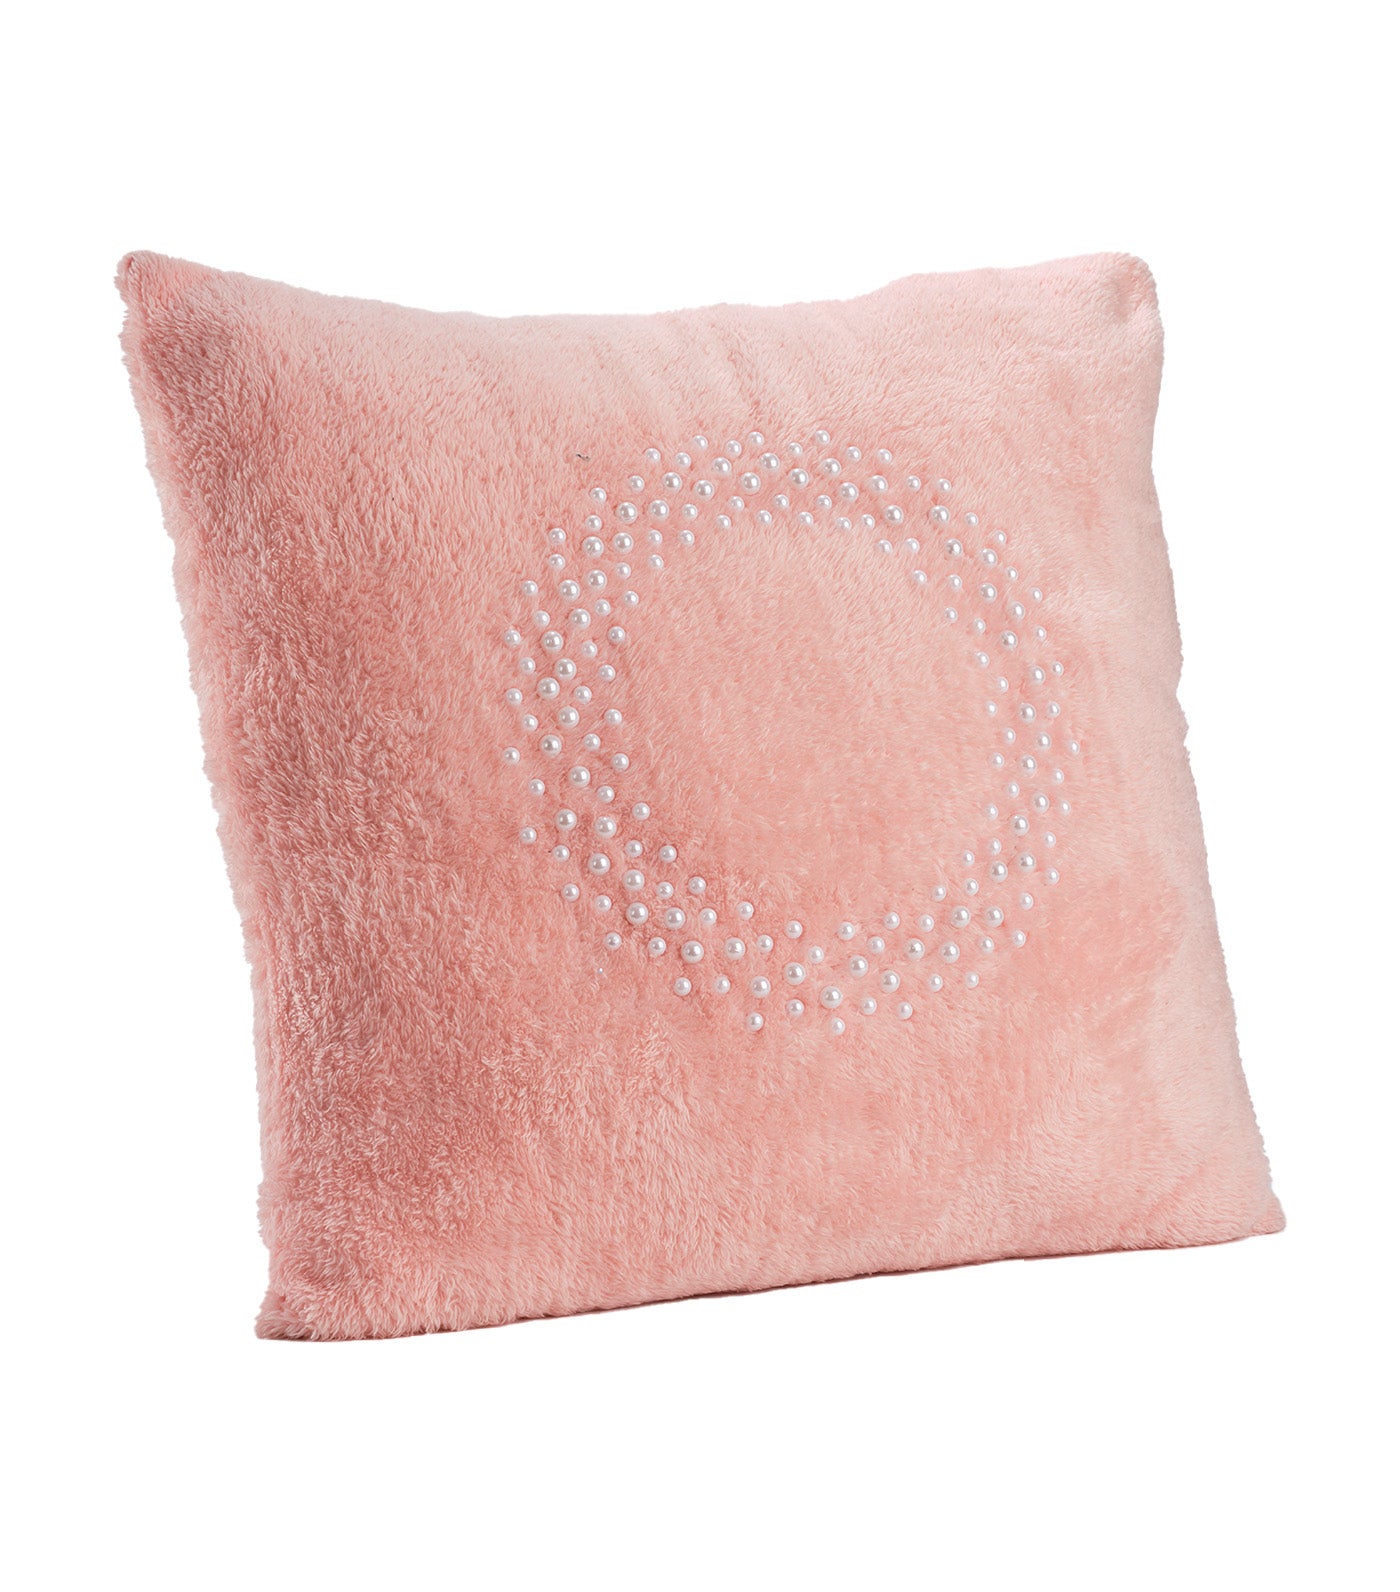 Rustan’s The Christmas Shop Pink Fur Pillow with Pearls